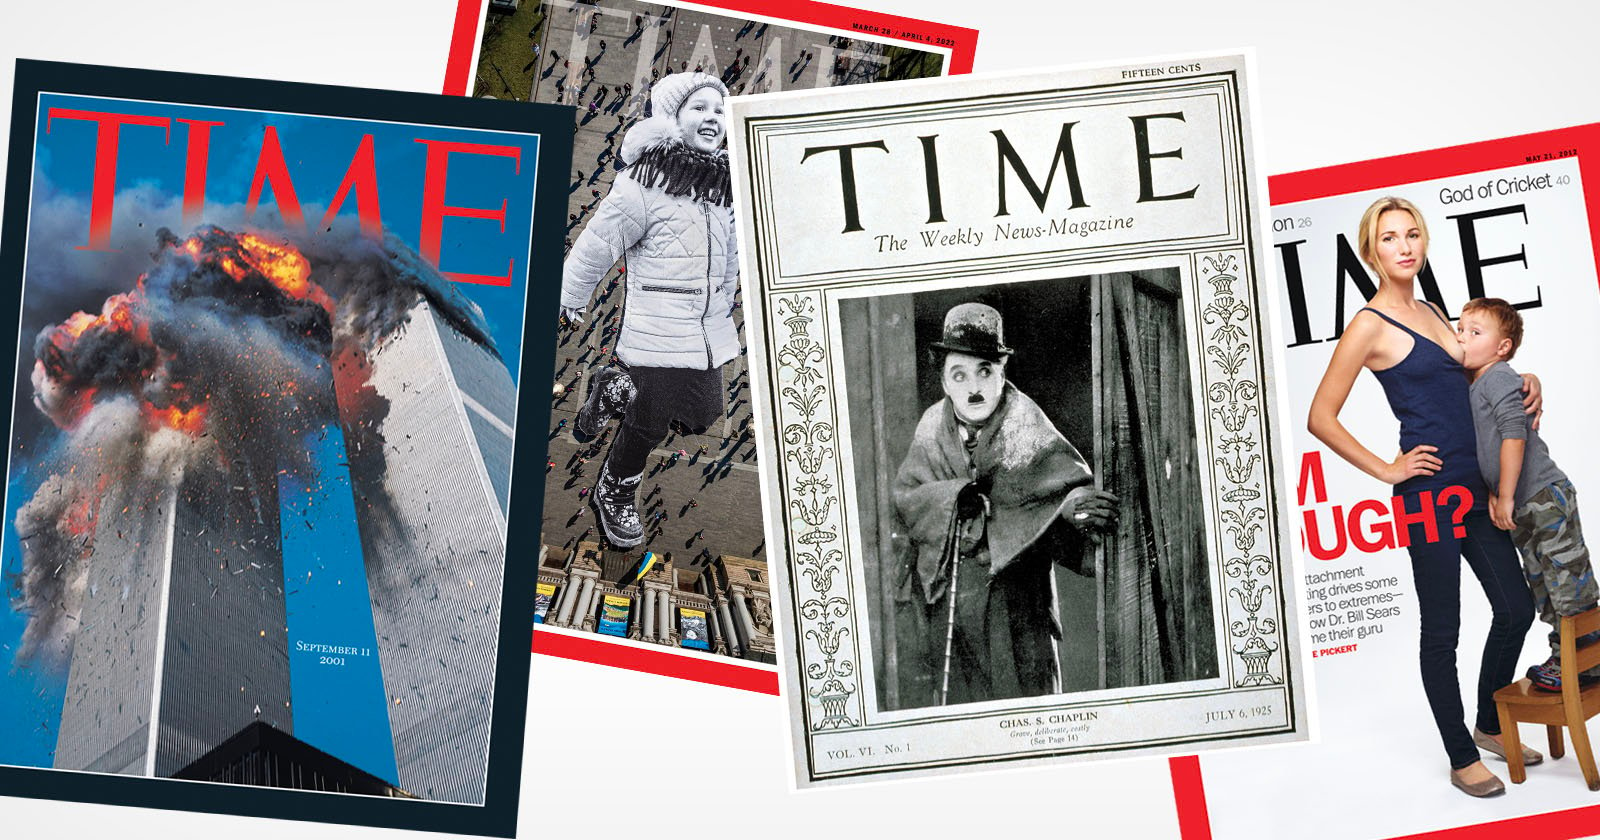 100 Years of TIME Magazine Through Some of its Iconic Cover Photos